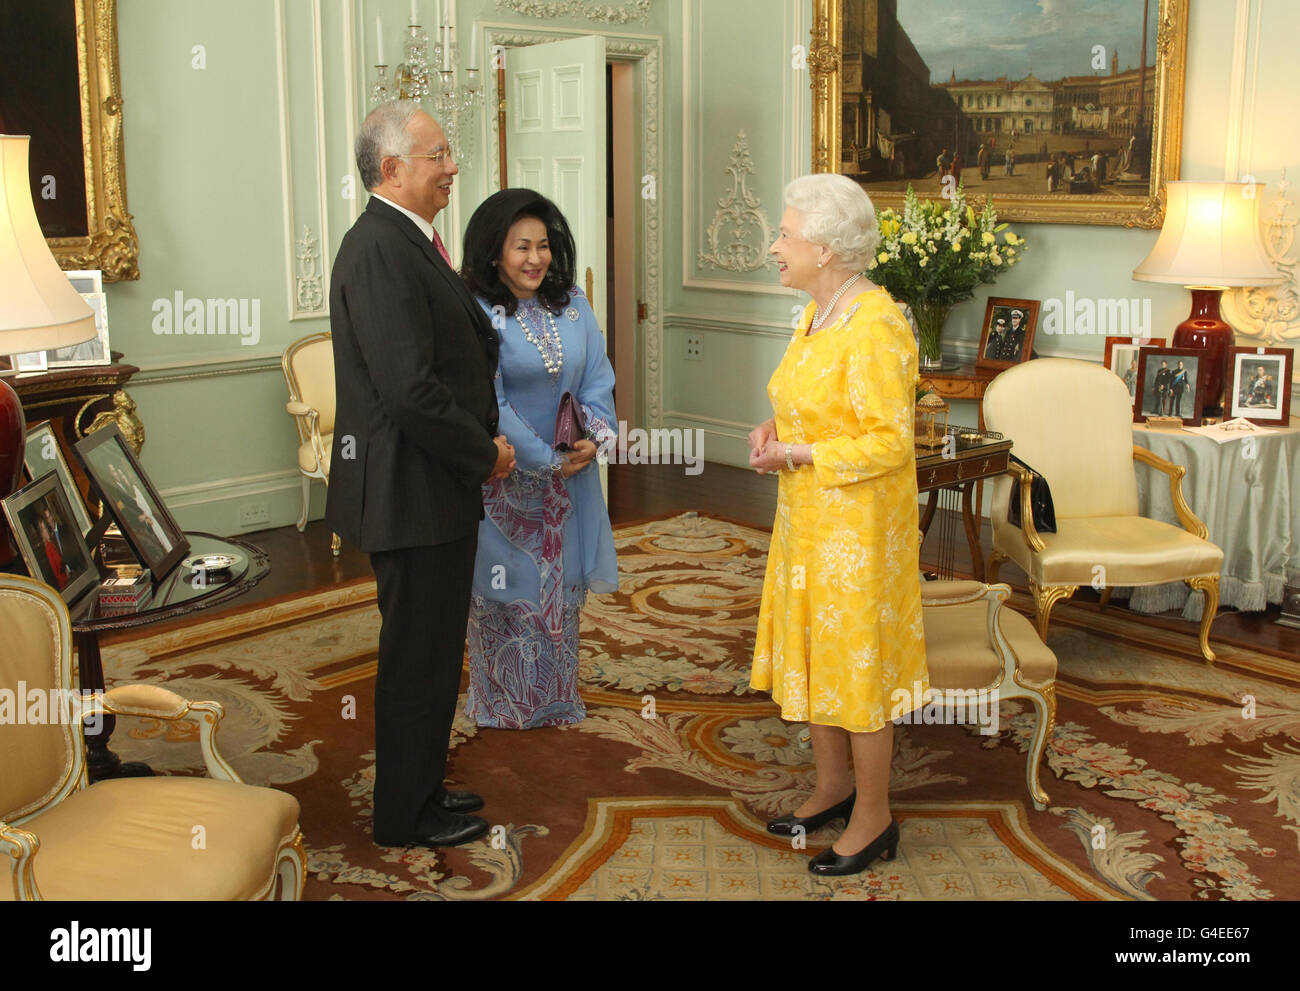 Britain's Queen Elizabeth II meets the Prime Minister of Malaysia Najib Razak and wife Rosmah Mansor during an audience at Buckingham Palace, central London. Stock Photo